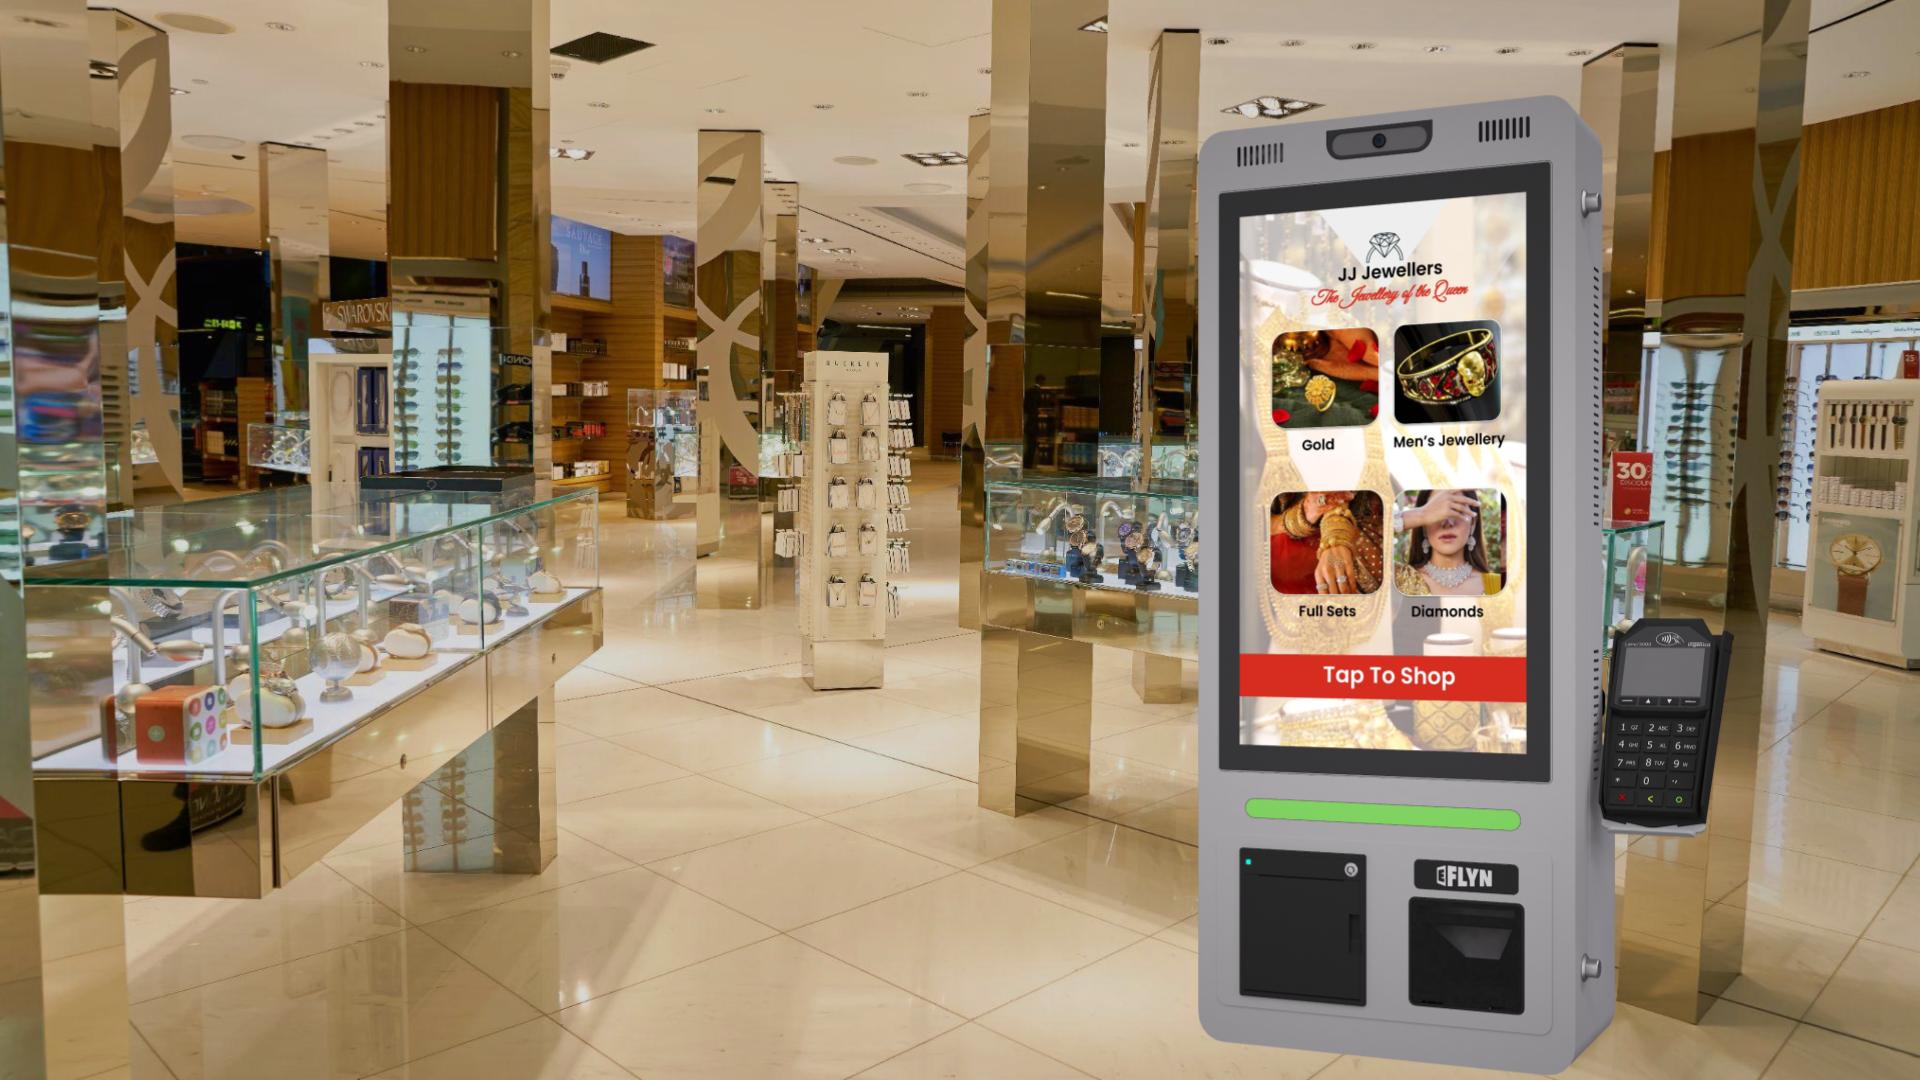 Shopify Integration Made Easy: Enhance Your Jewelry Store with Eflyn Self-Order Kiosks